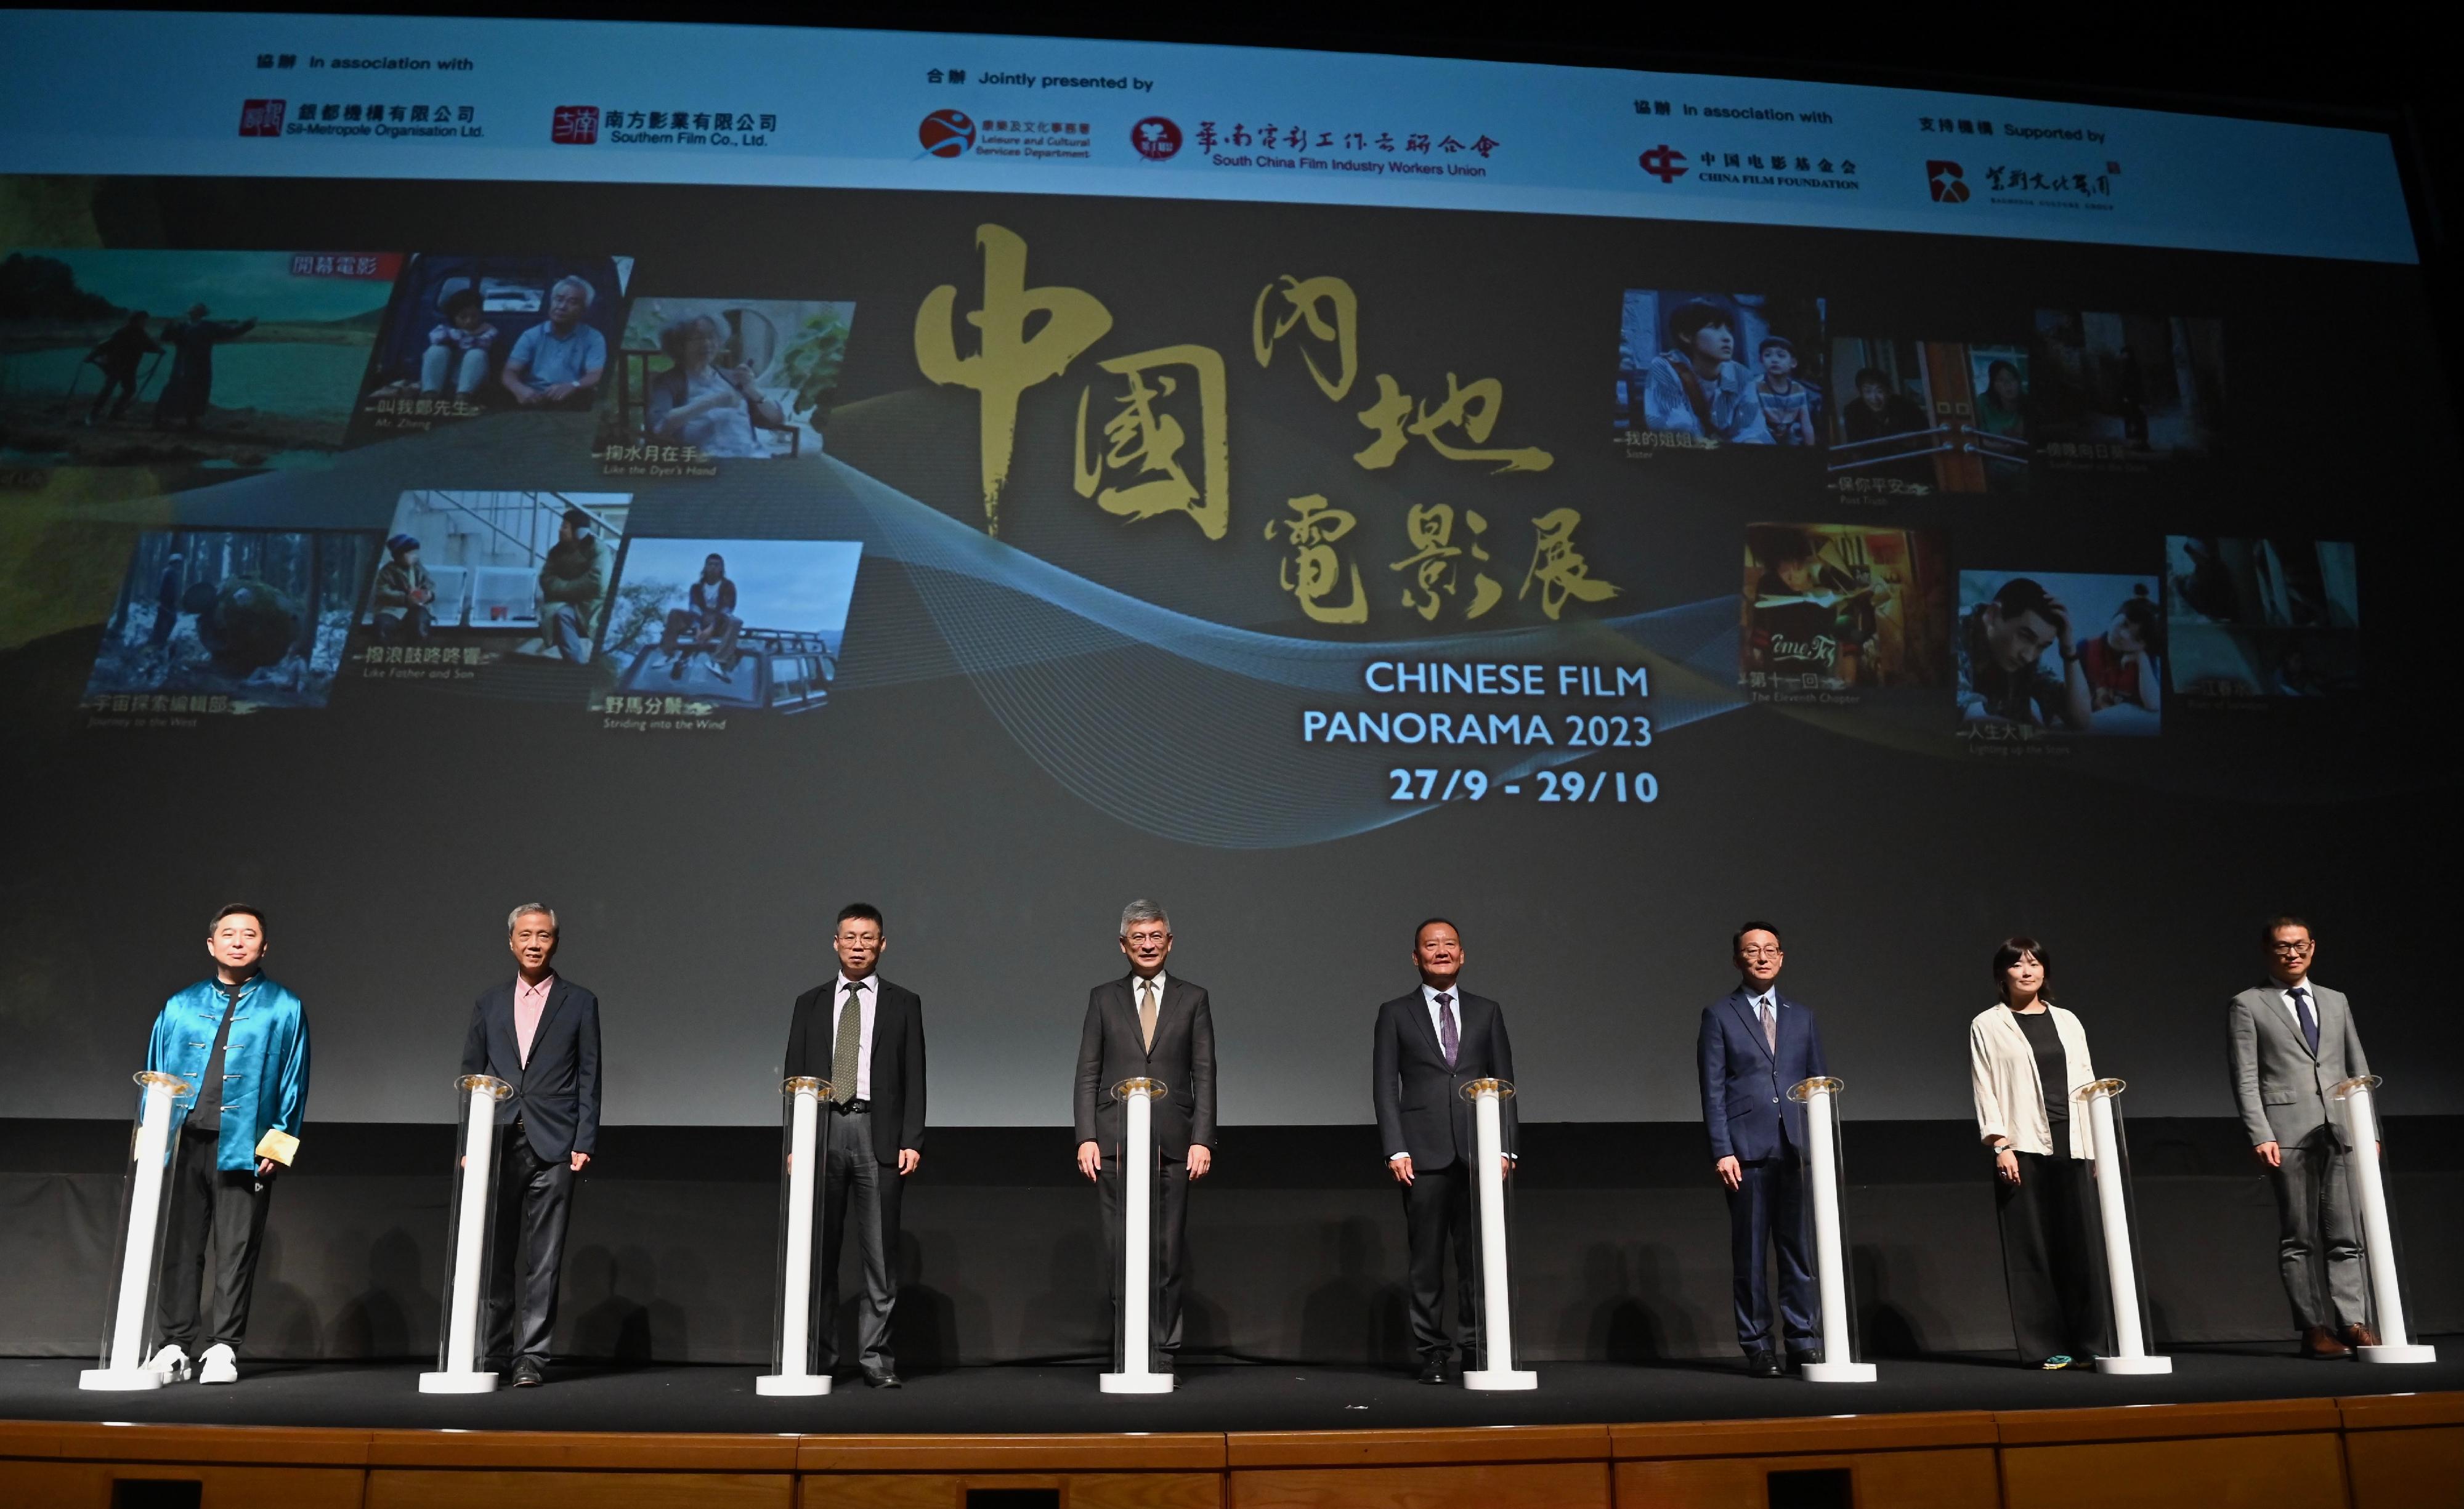 Chinese Film Panorama 2023 opened tonight (September 27) at the Grand Theatre of the Hong Kong Cultural Centre. Photo shows the officiating guests (from left) co-producer of "Mr. Zheng" (2022) Mr Hu Kai; the Chairman of the South China Film Industry Workers Union, Mr Cheung Hong-tat; Deputy Director-General of the Department of Publicity, Cultural and Sports Affairs of the Liaison Office of the Central People's Government in the Hong Kong Special Administrative Region Mr Sun Zhaomin; the Under Secretary for Culture, Sports and Tourism, Mr Raistlin Lau; Board Member of the Bauhinia Culture Group Mr Wu Baoan; the Director of Leisure and Cultural Services, Mr Vincent Liu; the director of the opening film "The Cord of Life" (2023), Qiao Sixue; and the General Manager of Sil-Metropole Organisation Ltd, Mr Ding Kai, at the opening ceremony.